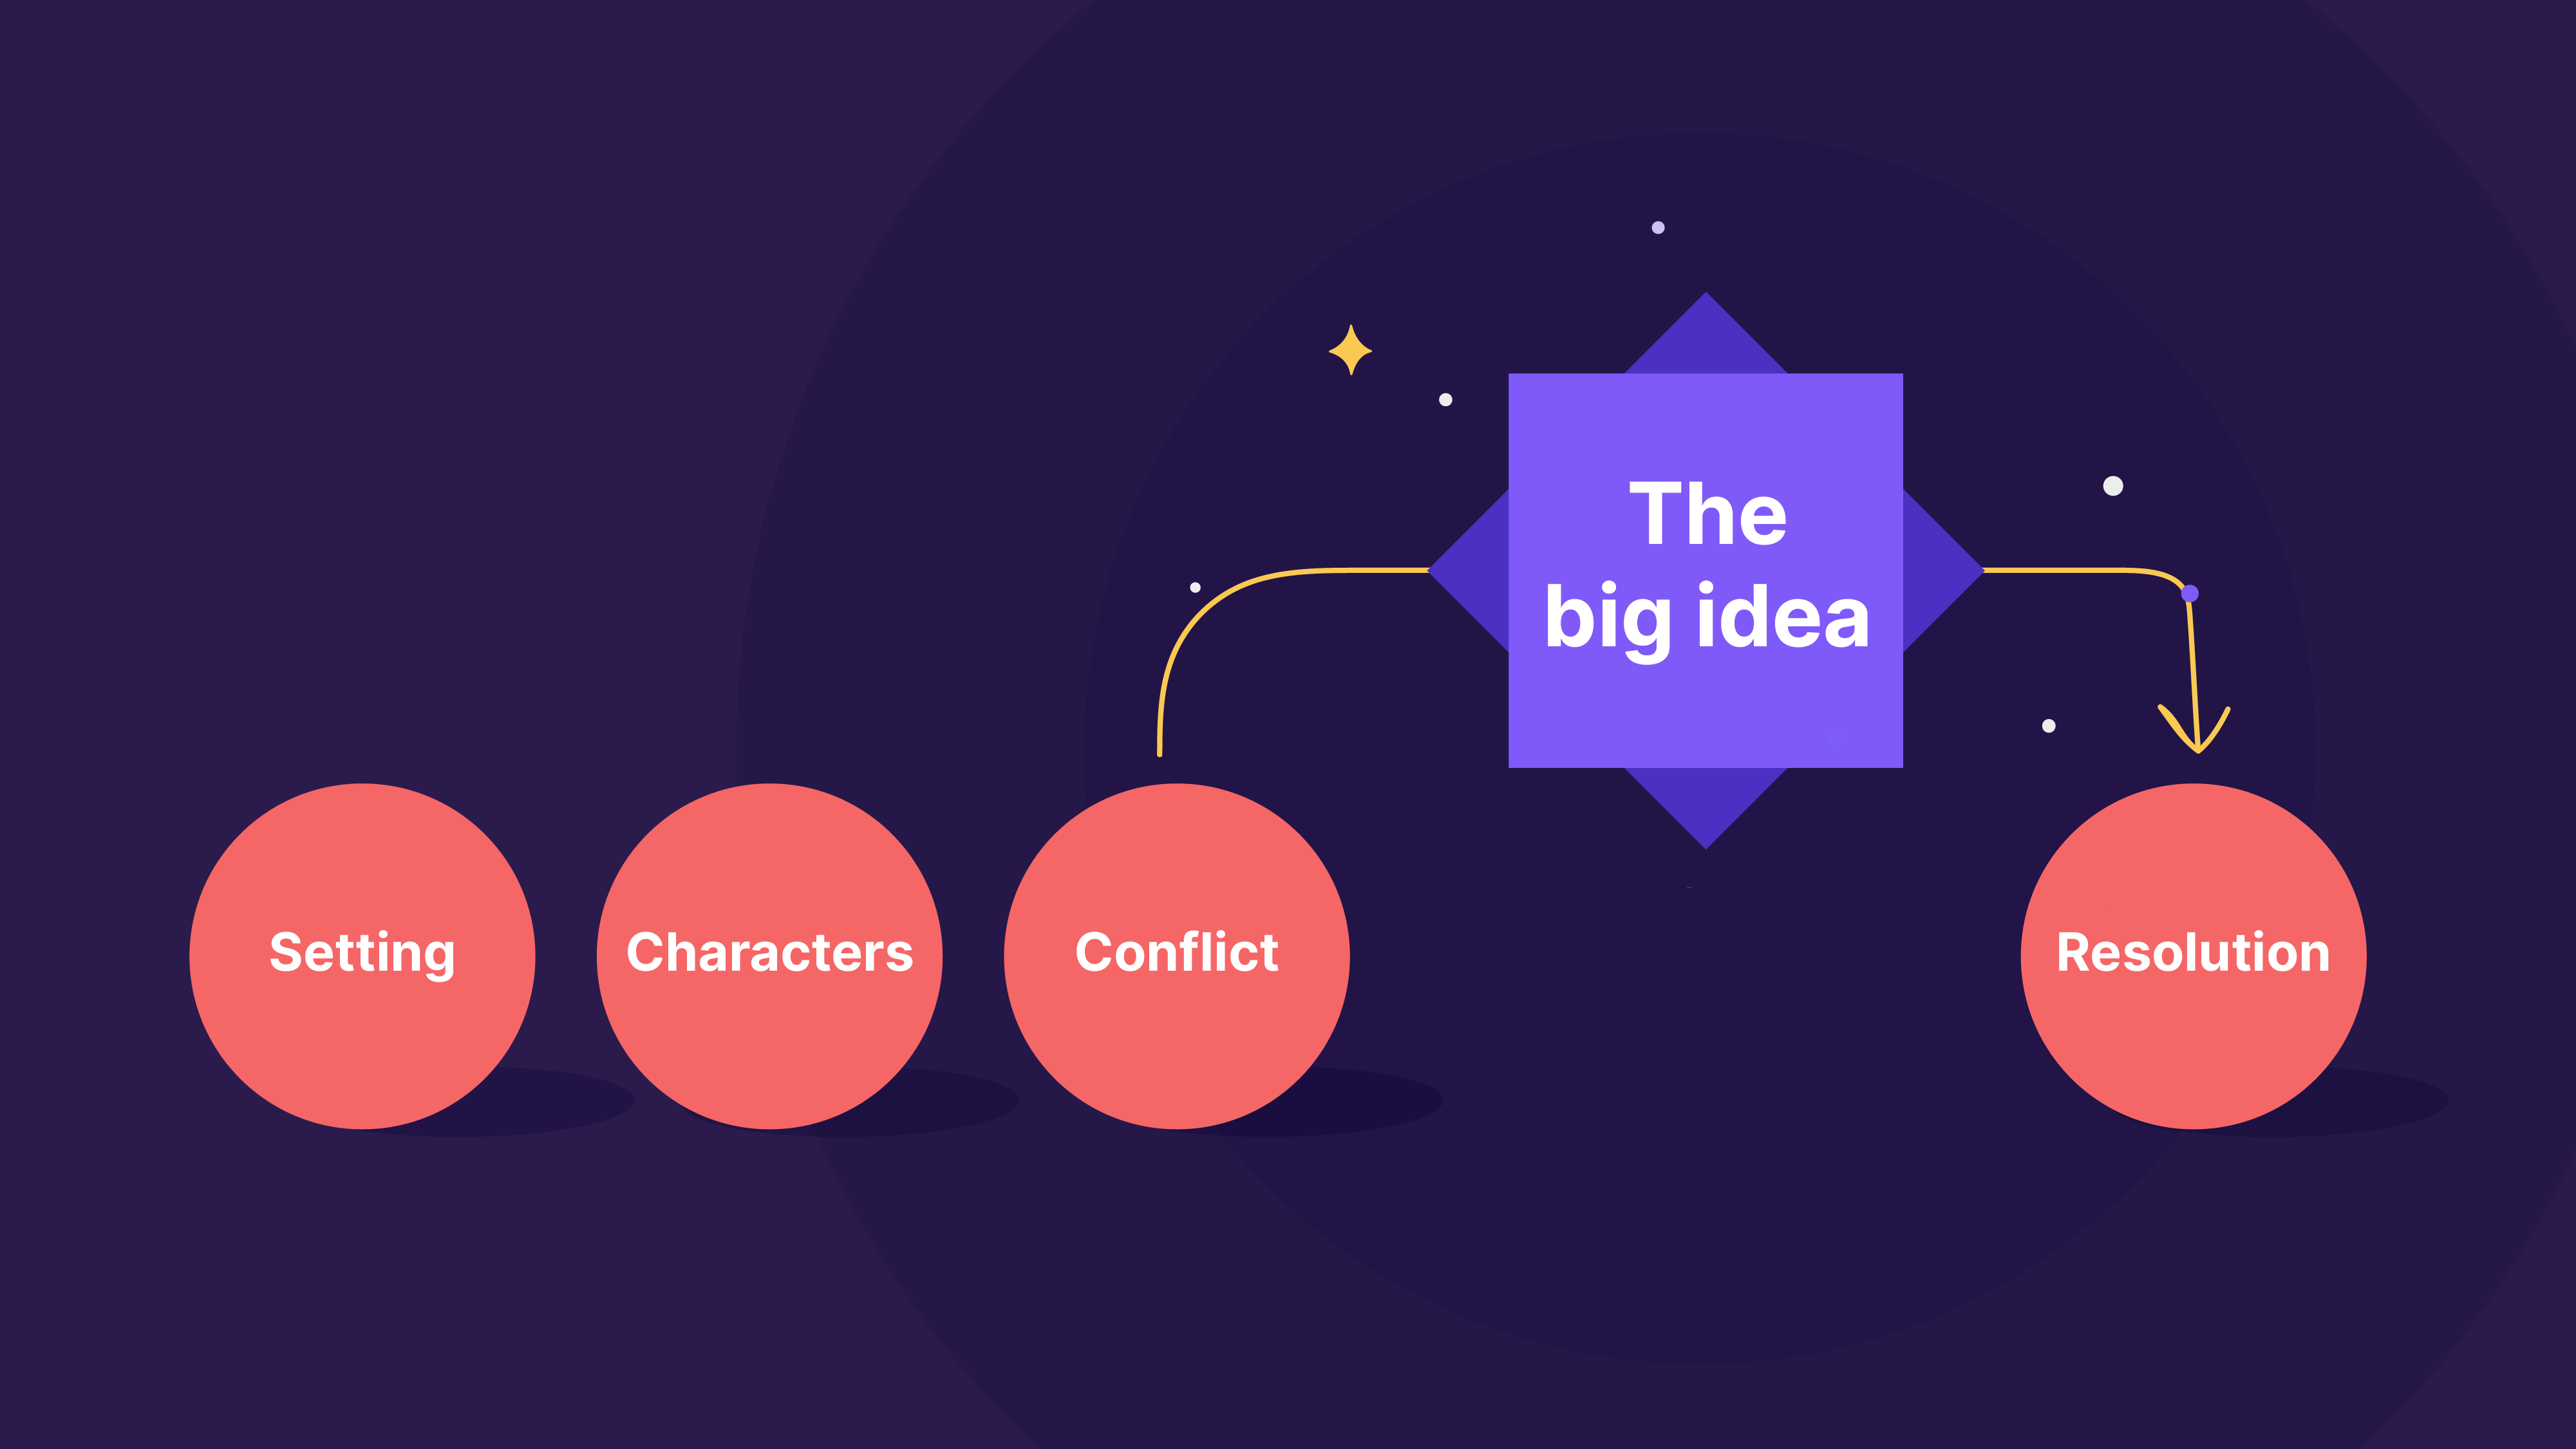 Components of a story